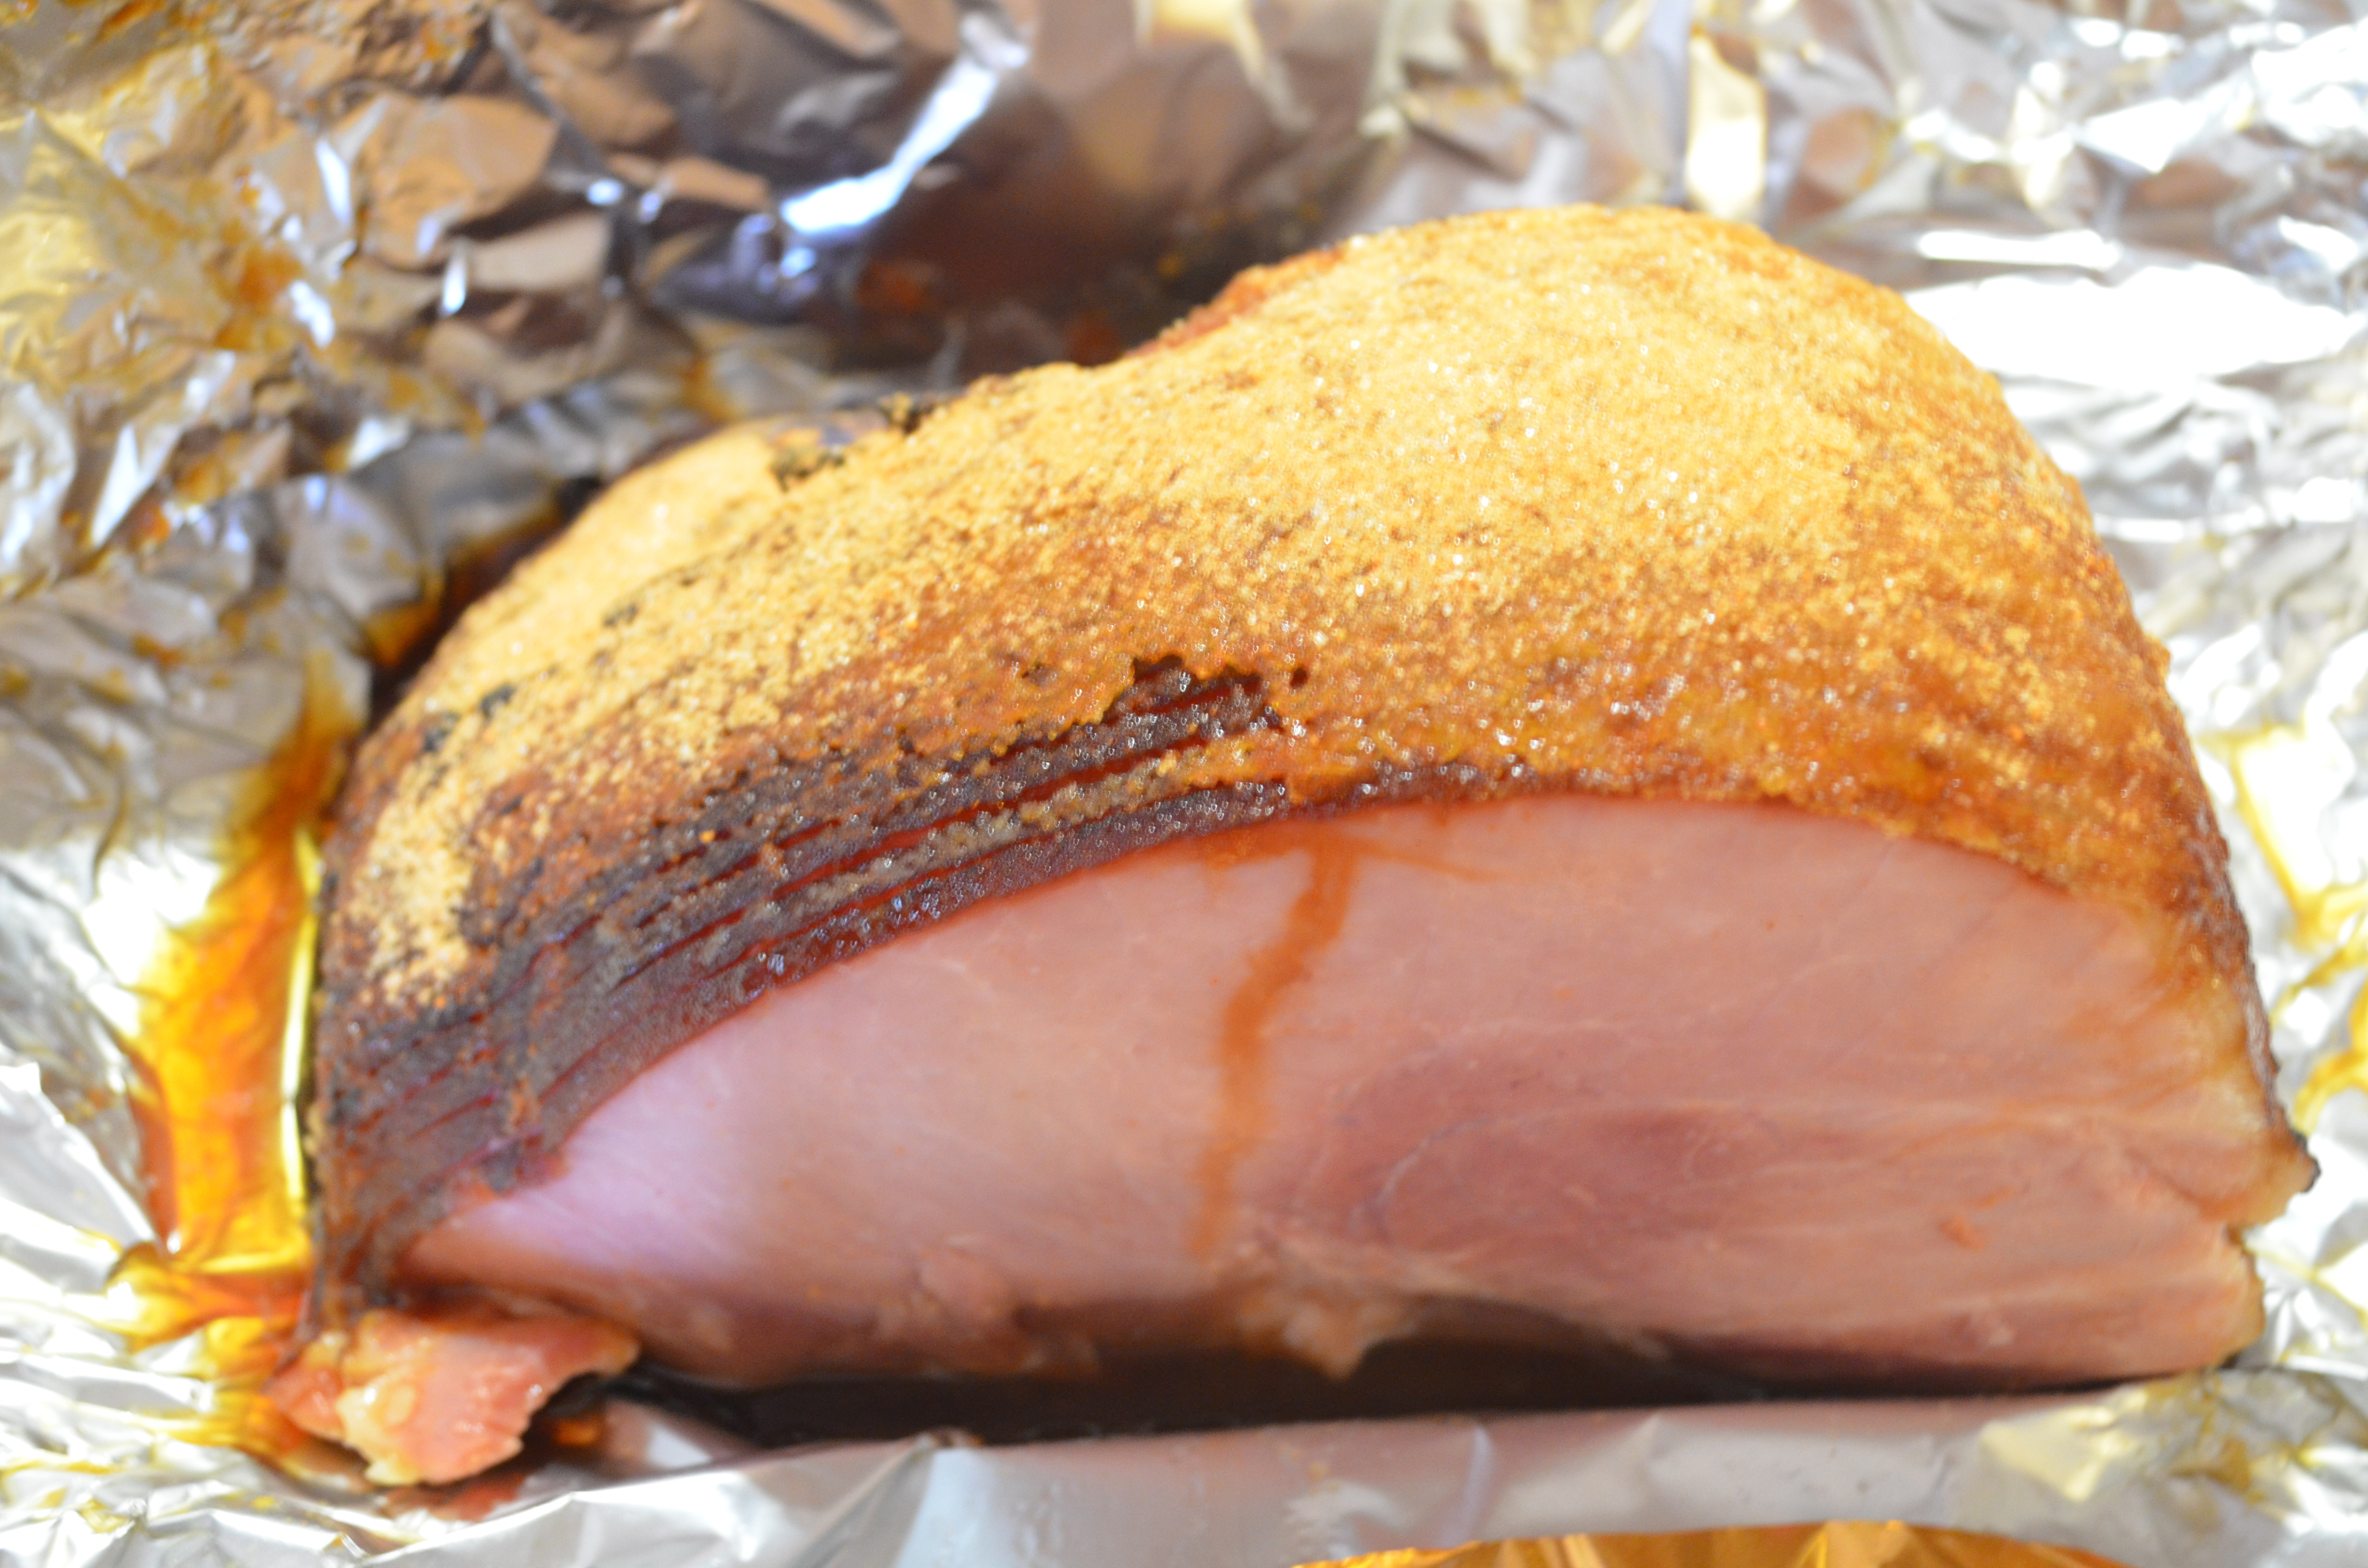 Honey Baked Ham Easter
 Enjoy your Easter Meal with HoneyBaked Ham & Win a $50